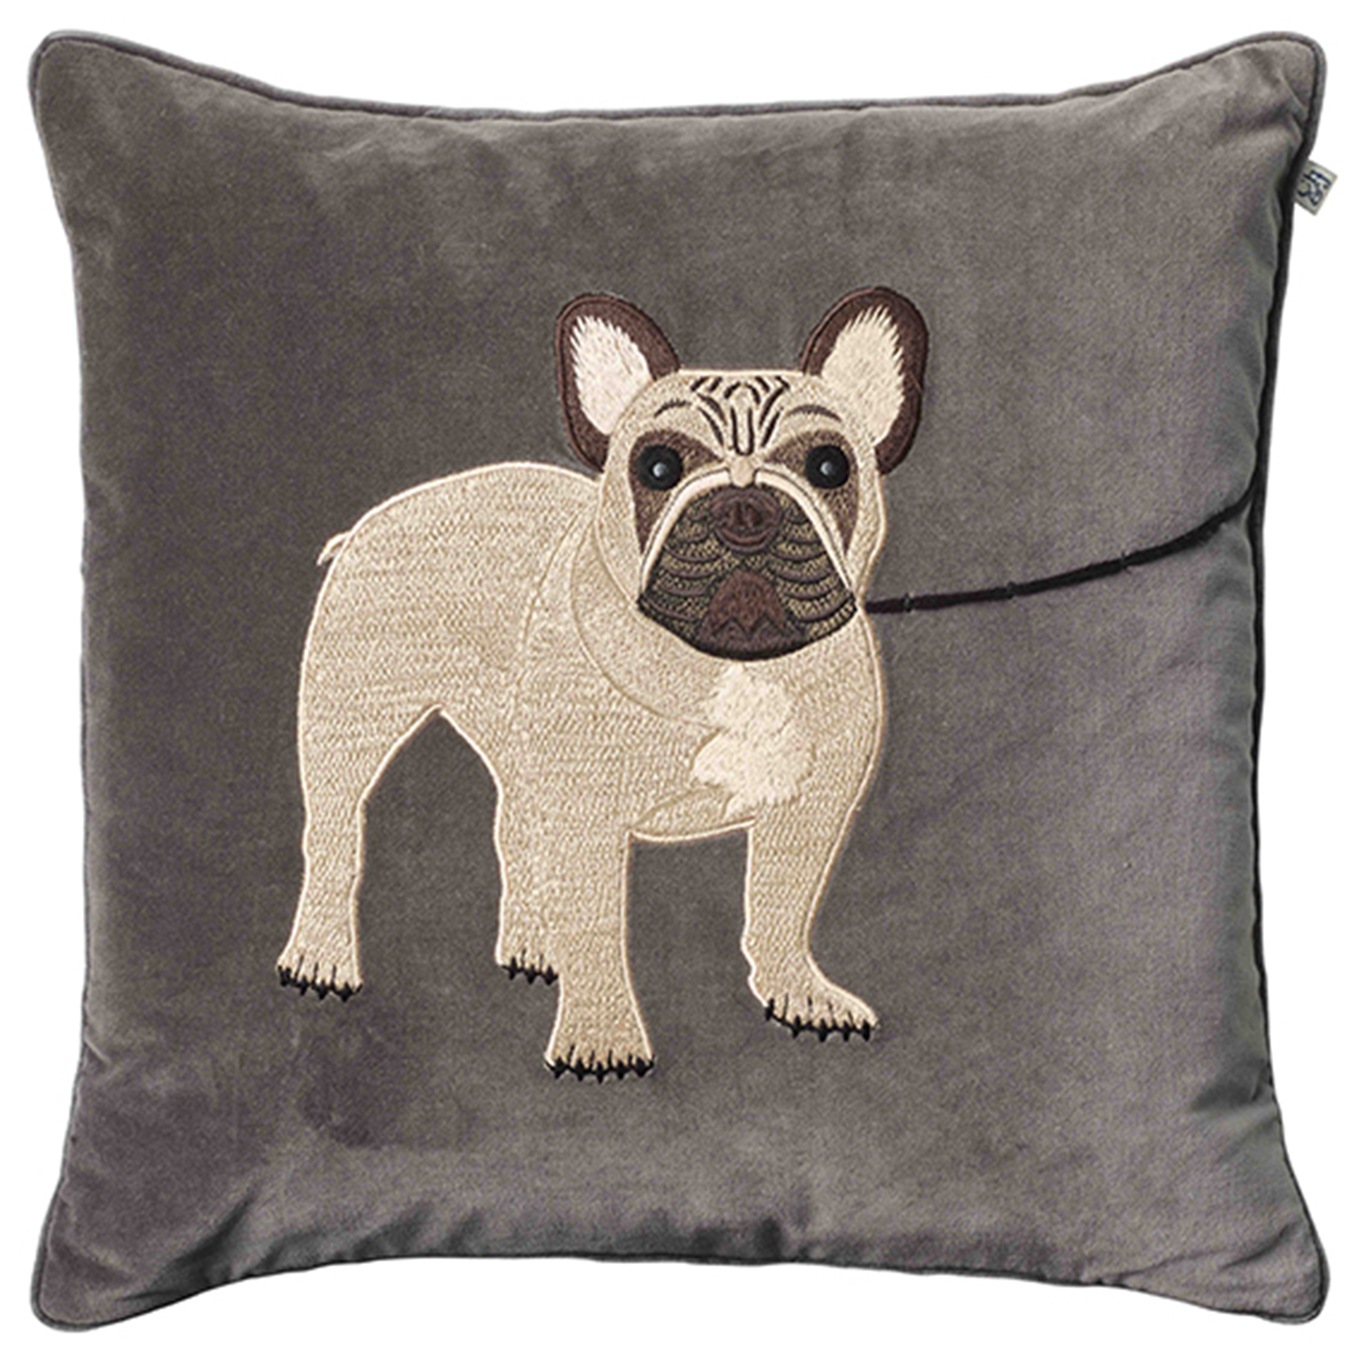 Embroidered French Bull Dog Cushion Cover, 50x50 cm